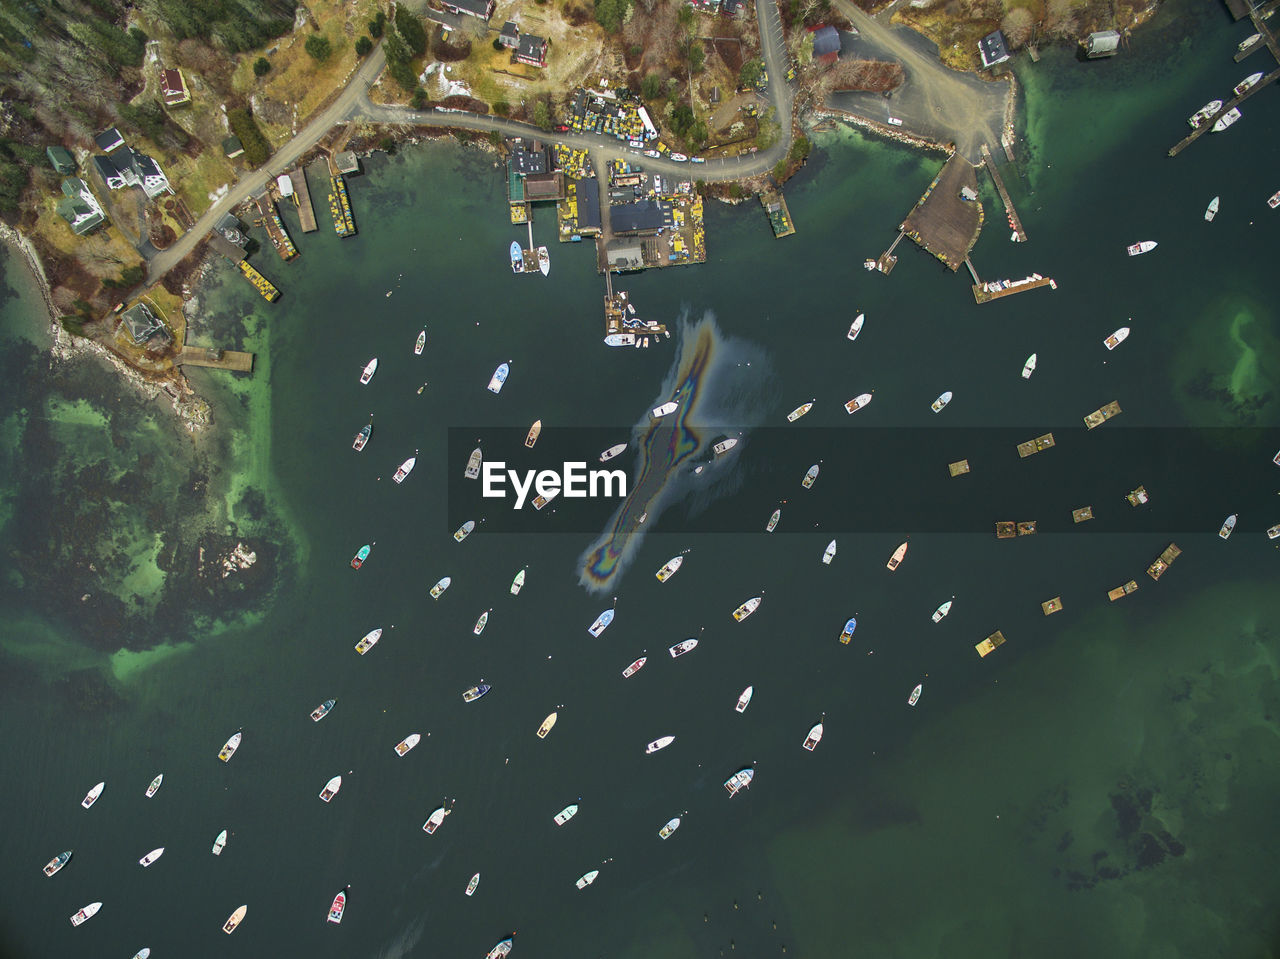 Lobster boats in a maine harbor from above